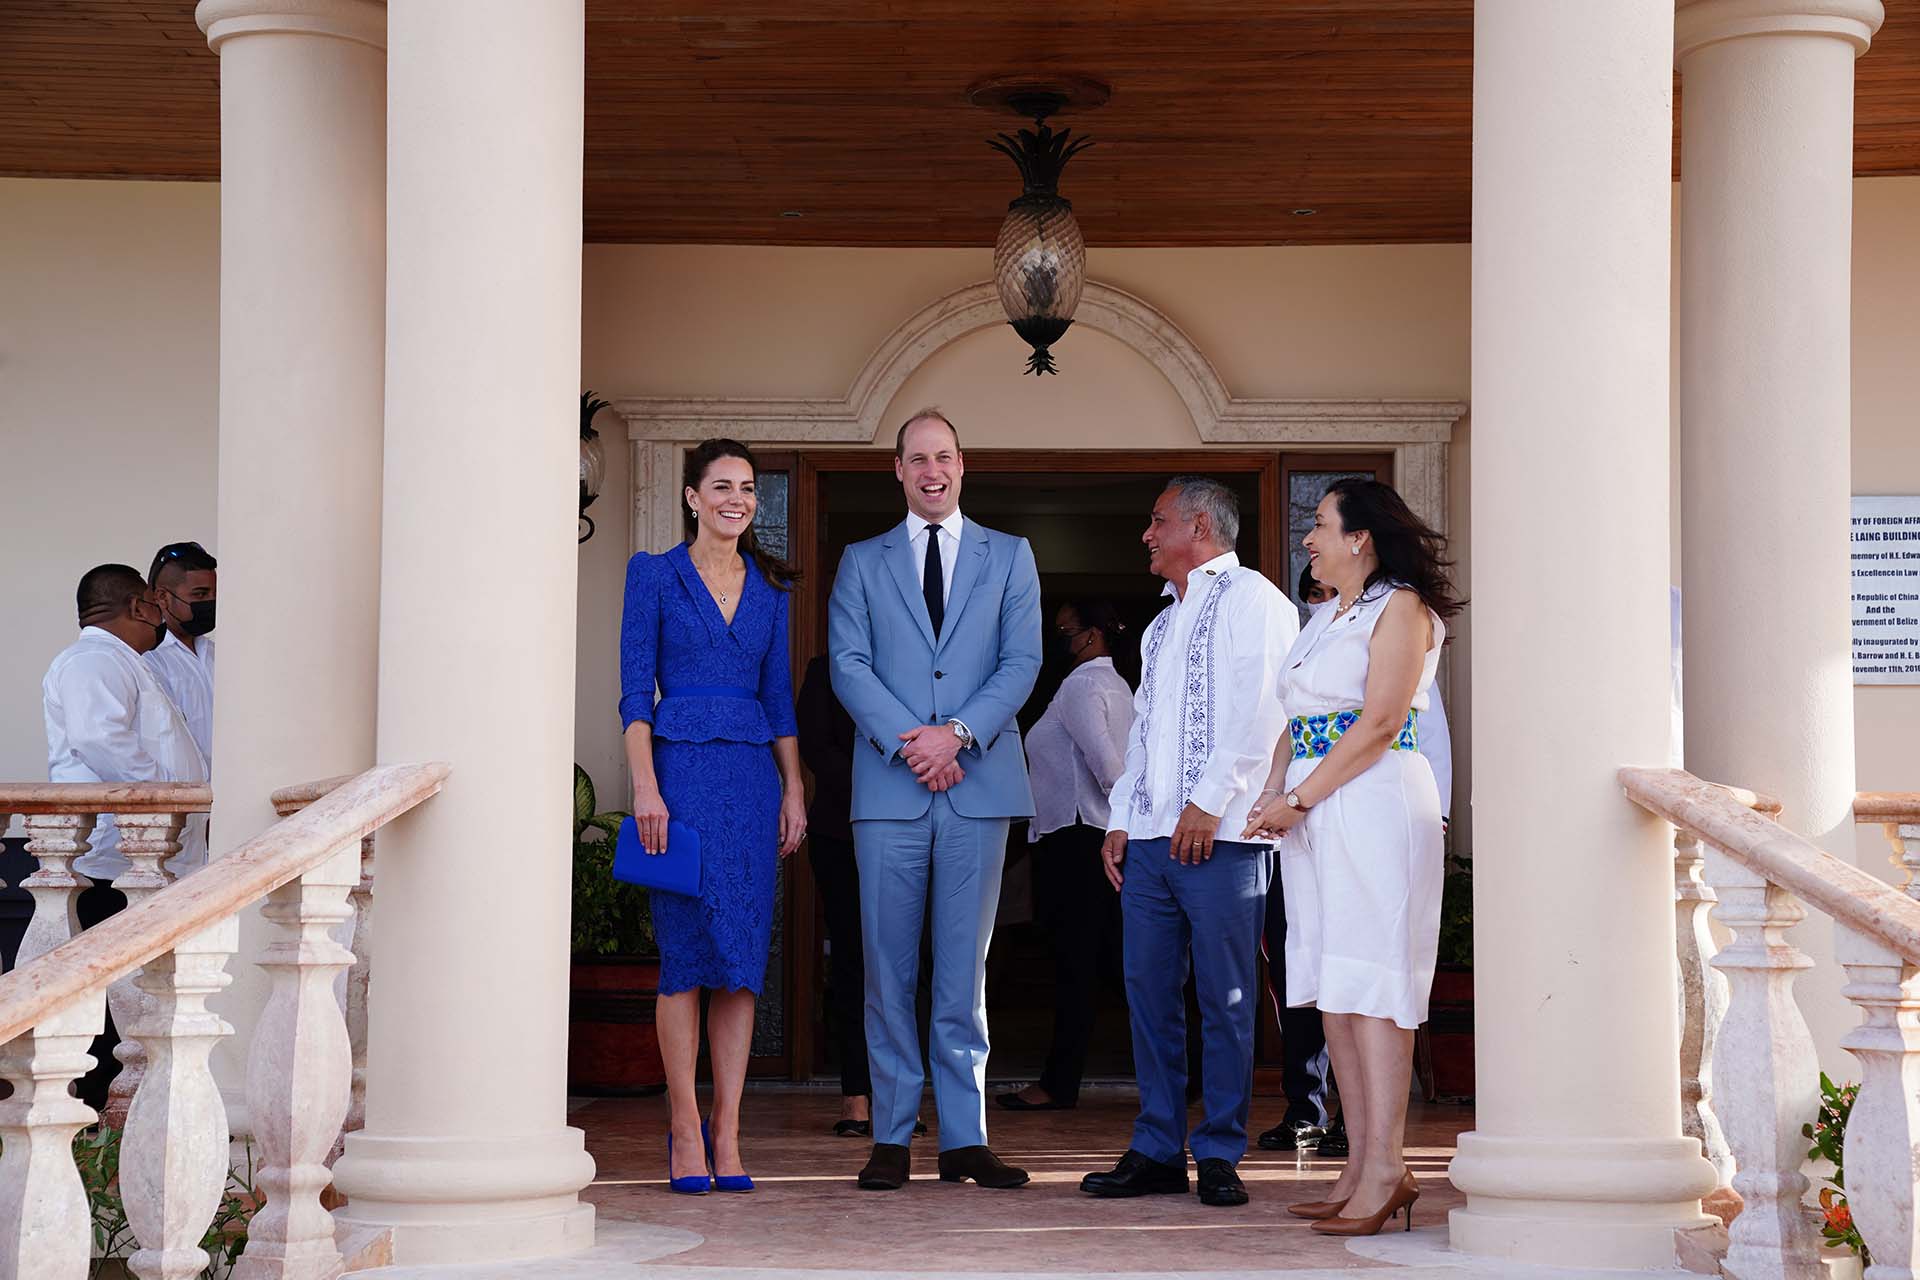 Royal visit to the Caribbean - Day 1